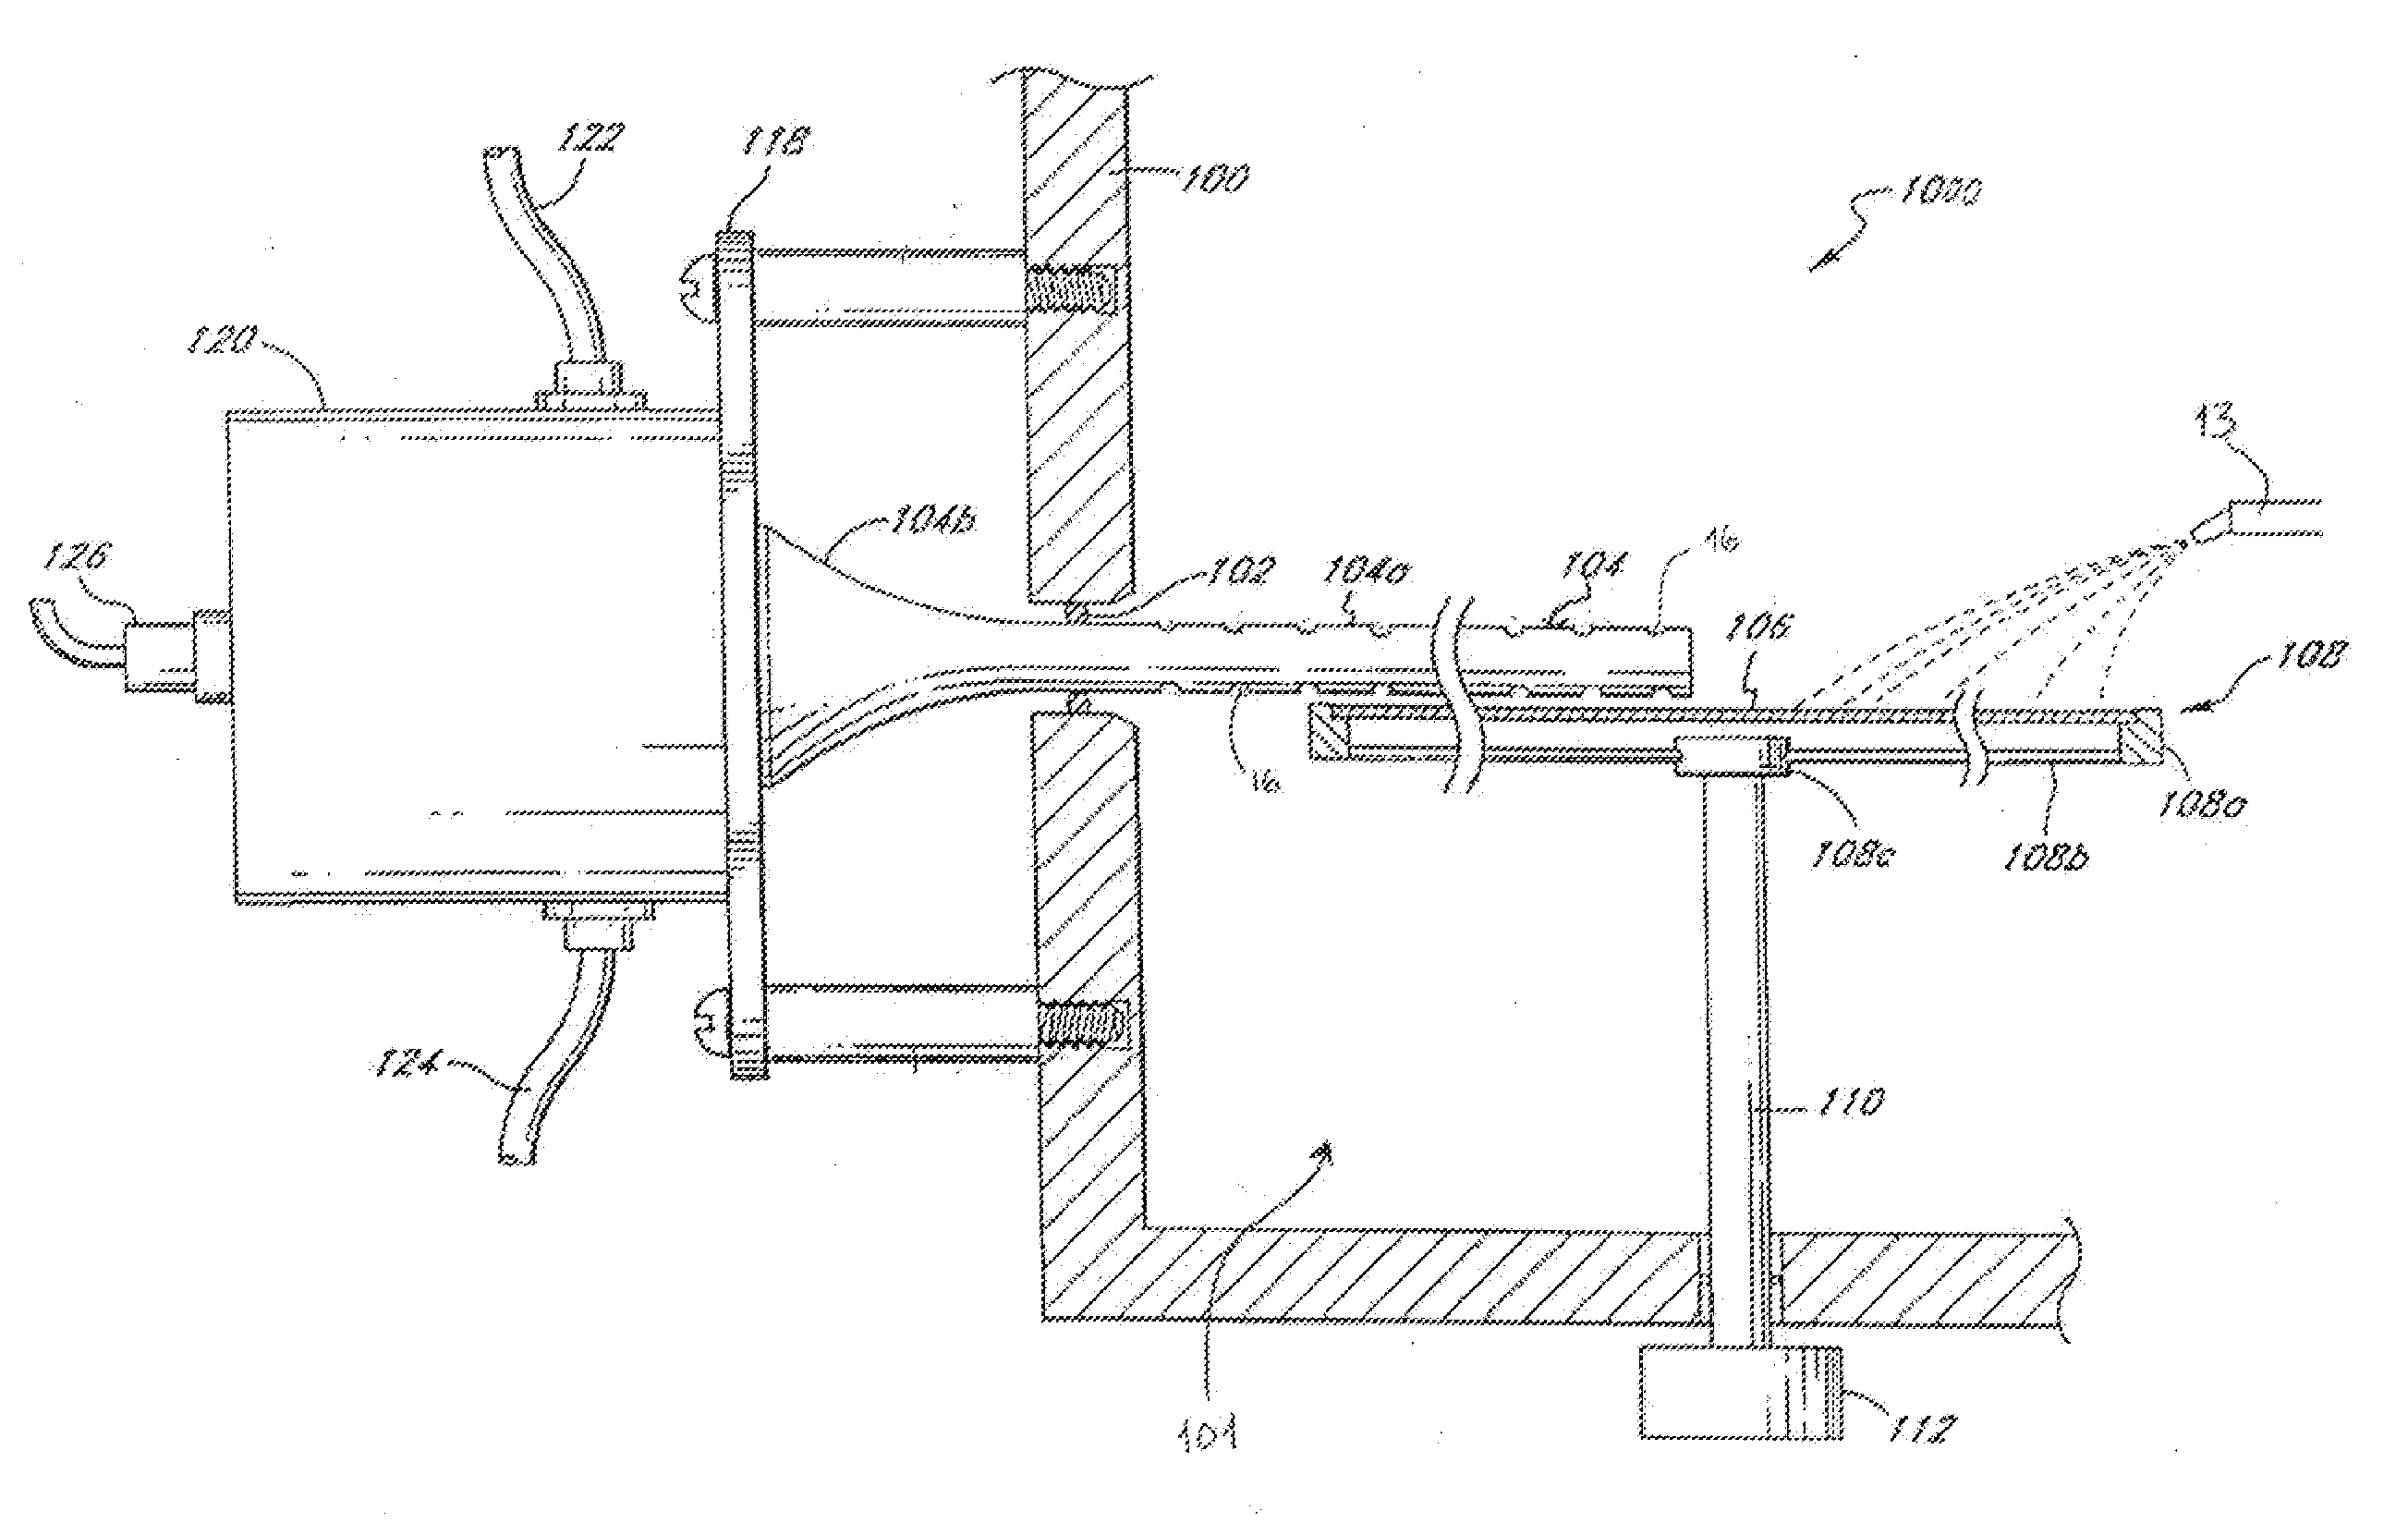 Transducer assembly incorporating a transmitter having through holes, and method and system for cleaning a substrate utilizing the same